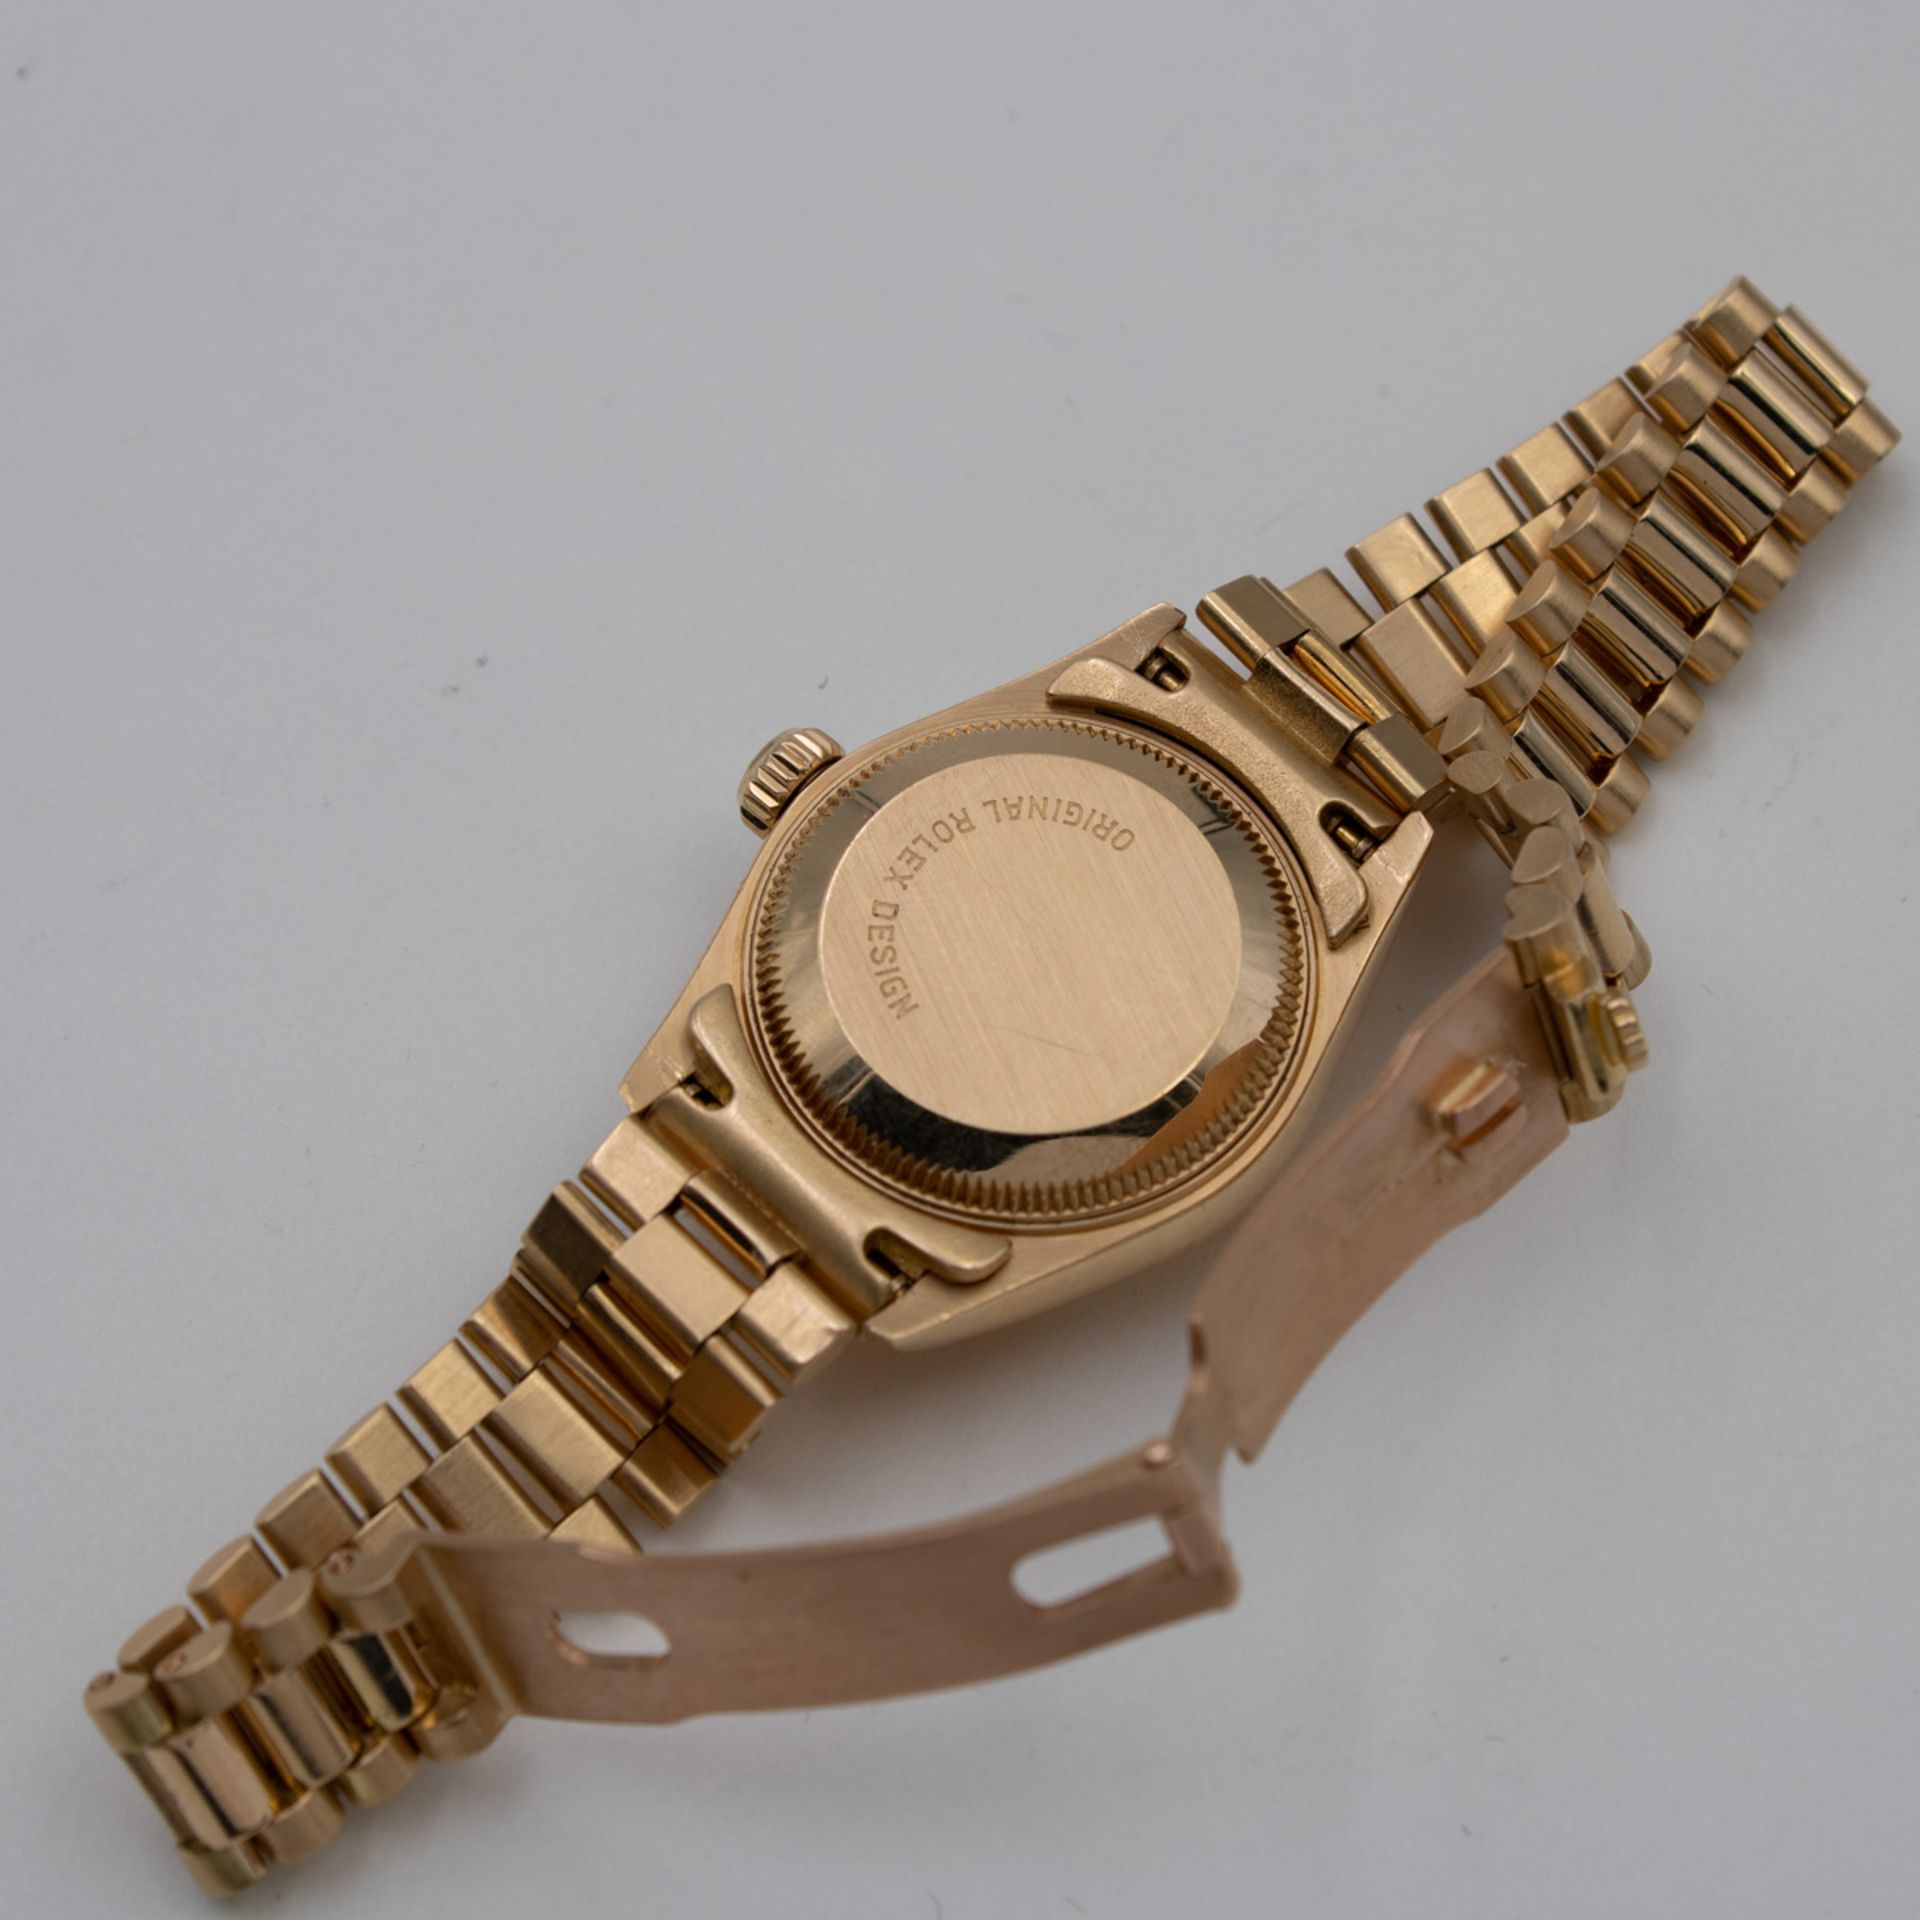 Rolex Oyster Perpetual Datejust ladies watch - Image 3 of 4